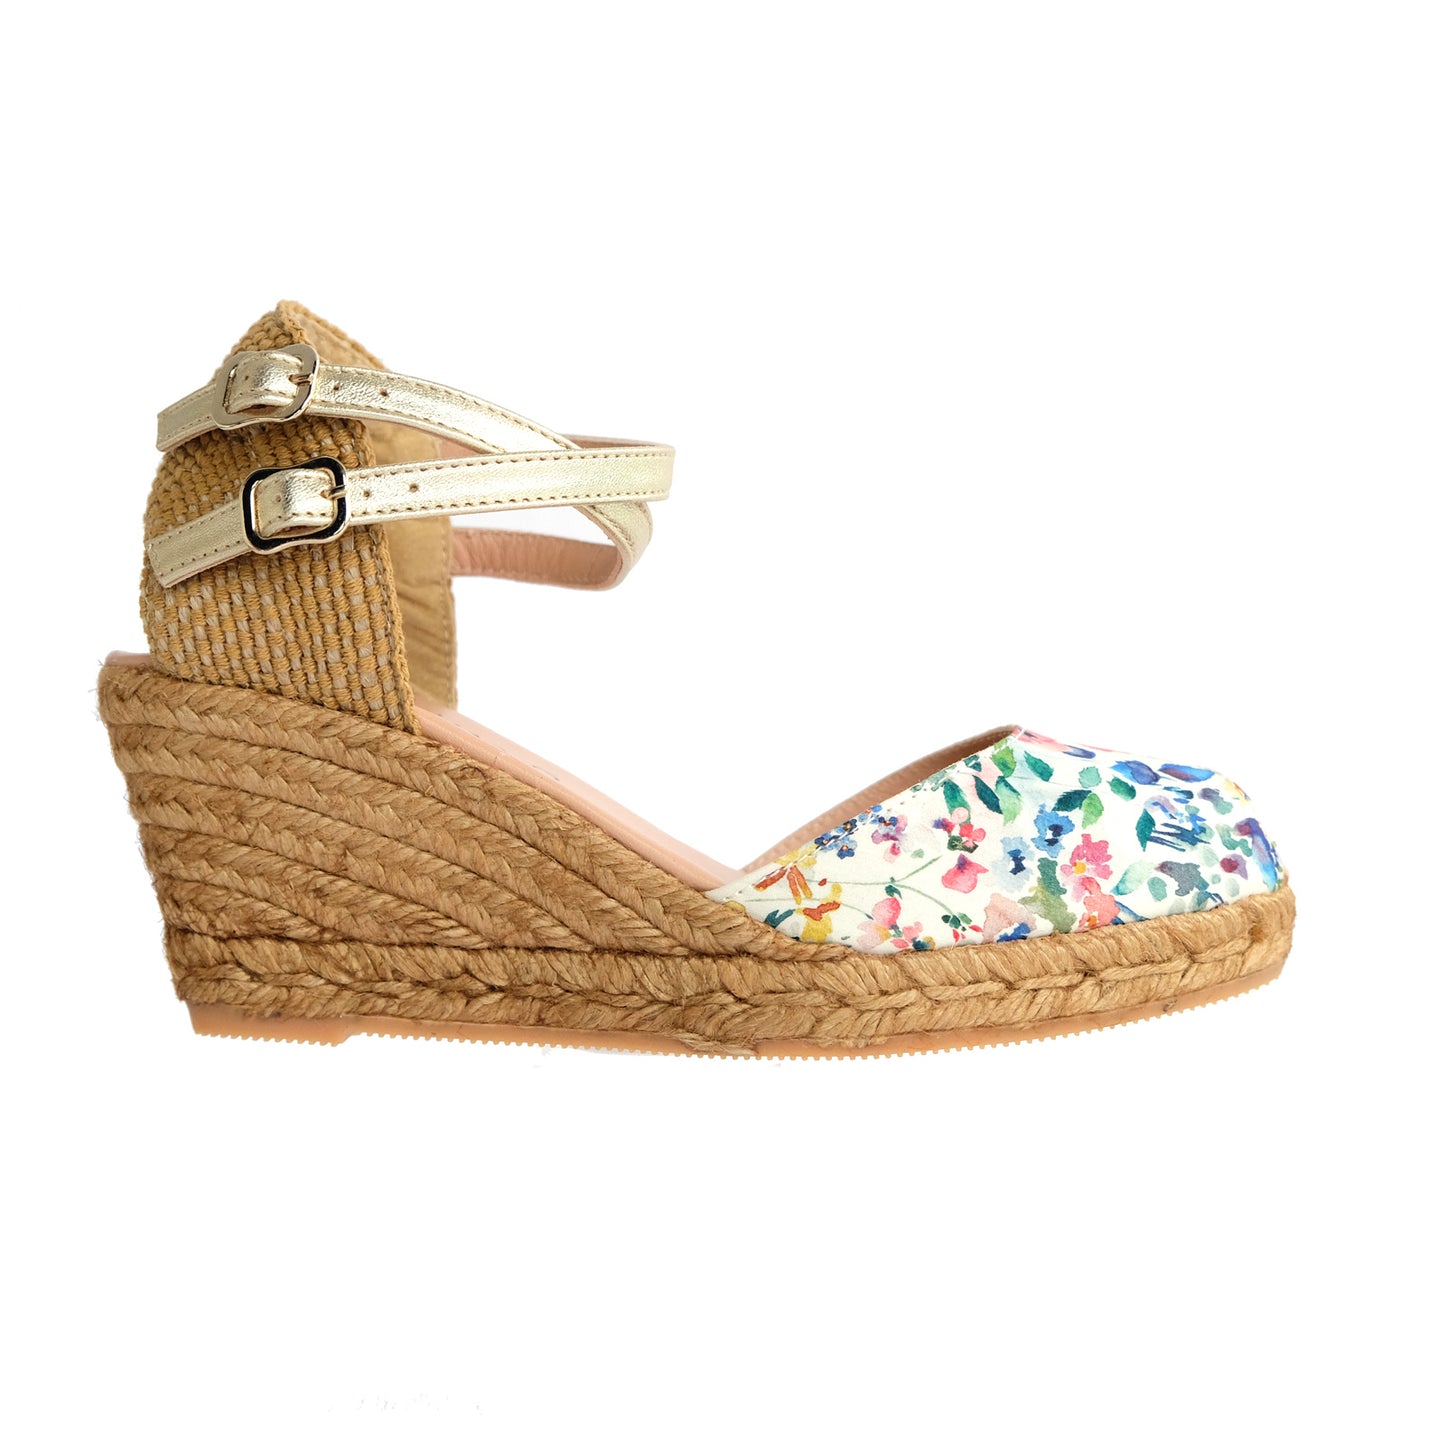 JUDY LIBERTY wedges - Elizabeth Little and Badt and Co. Limited Collection - Badt and Co